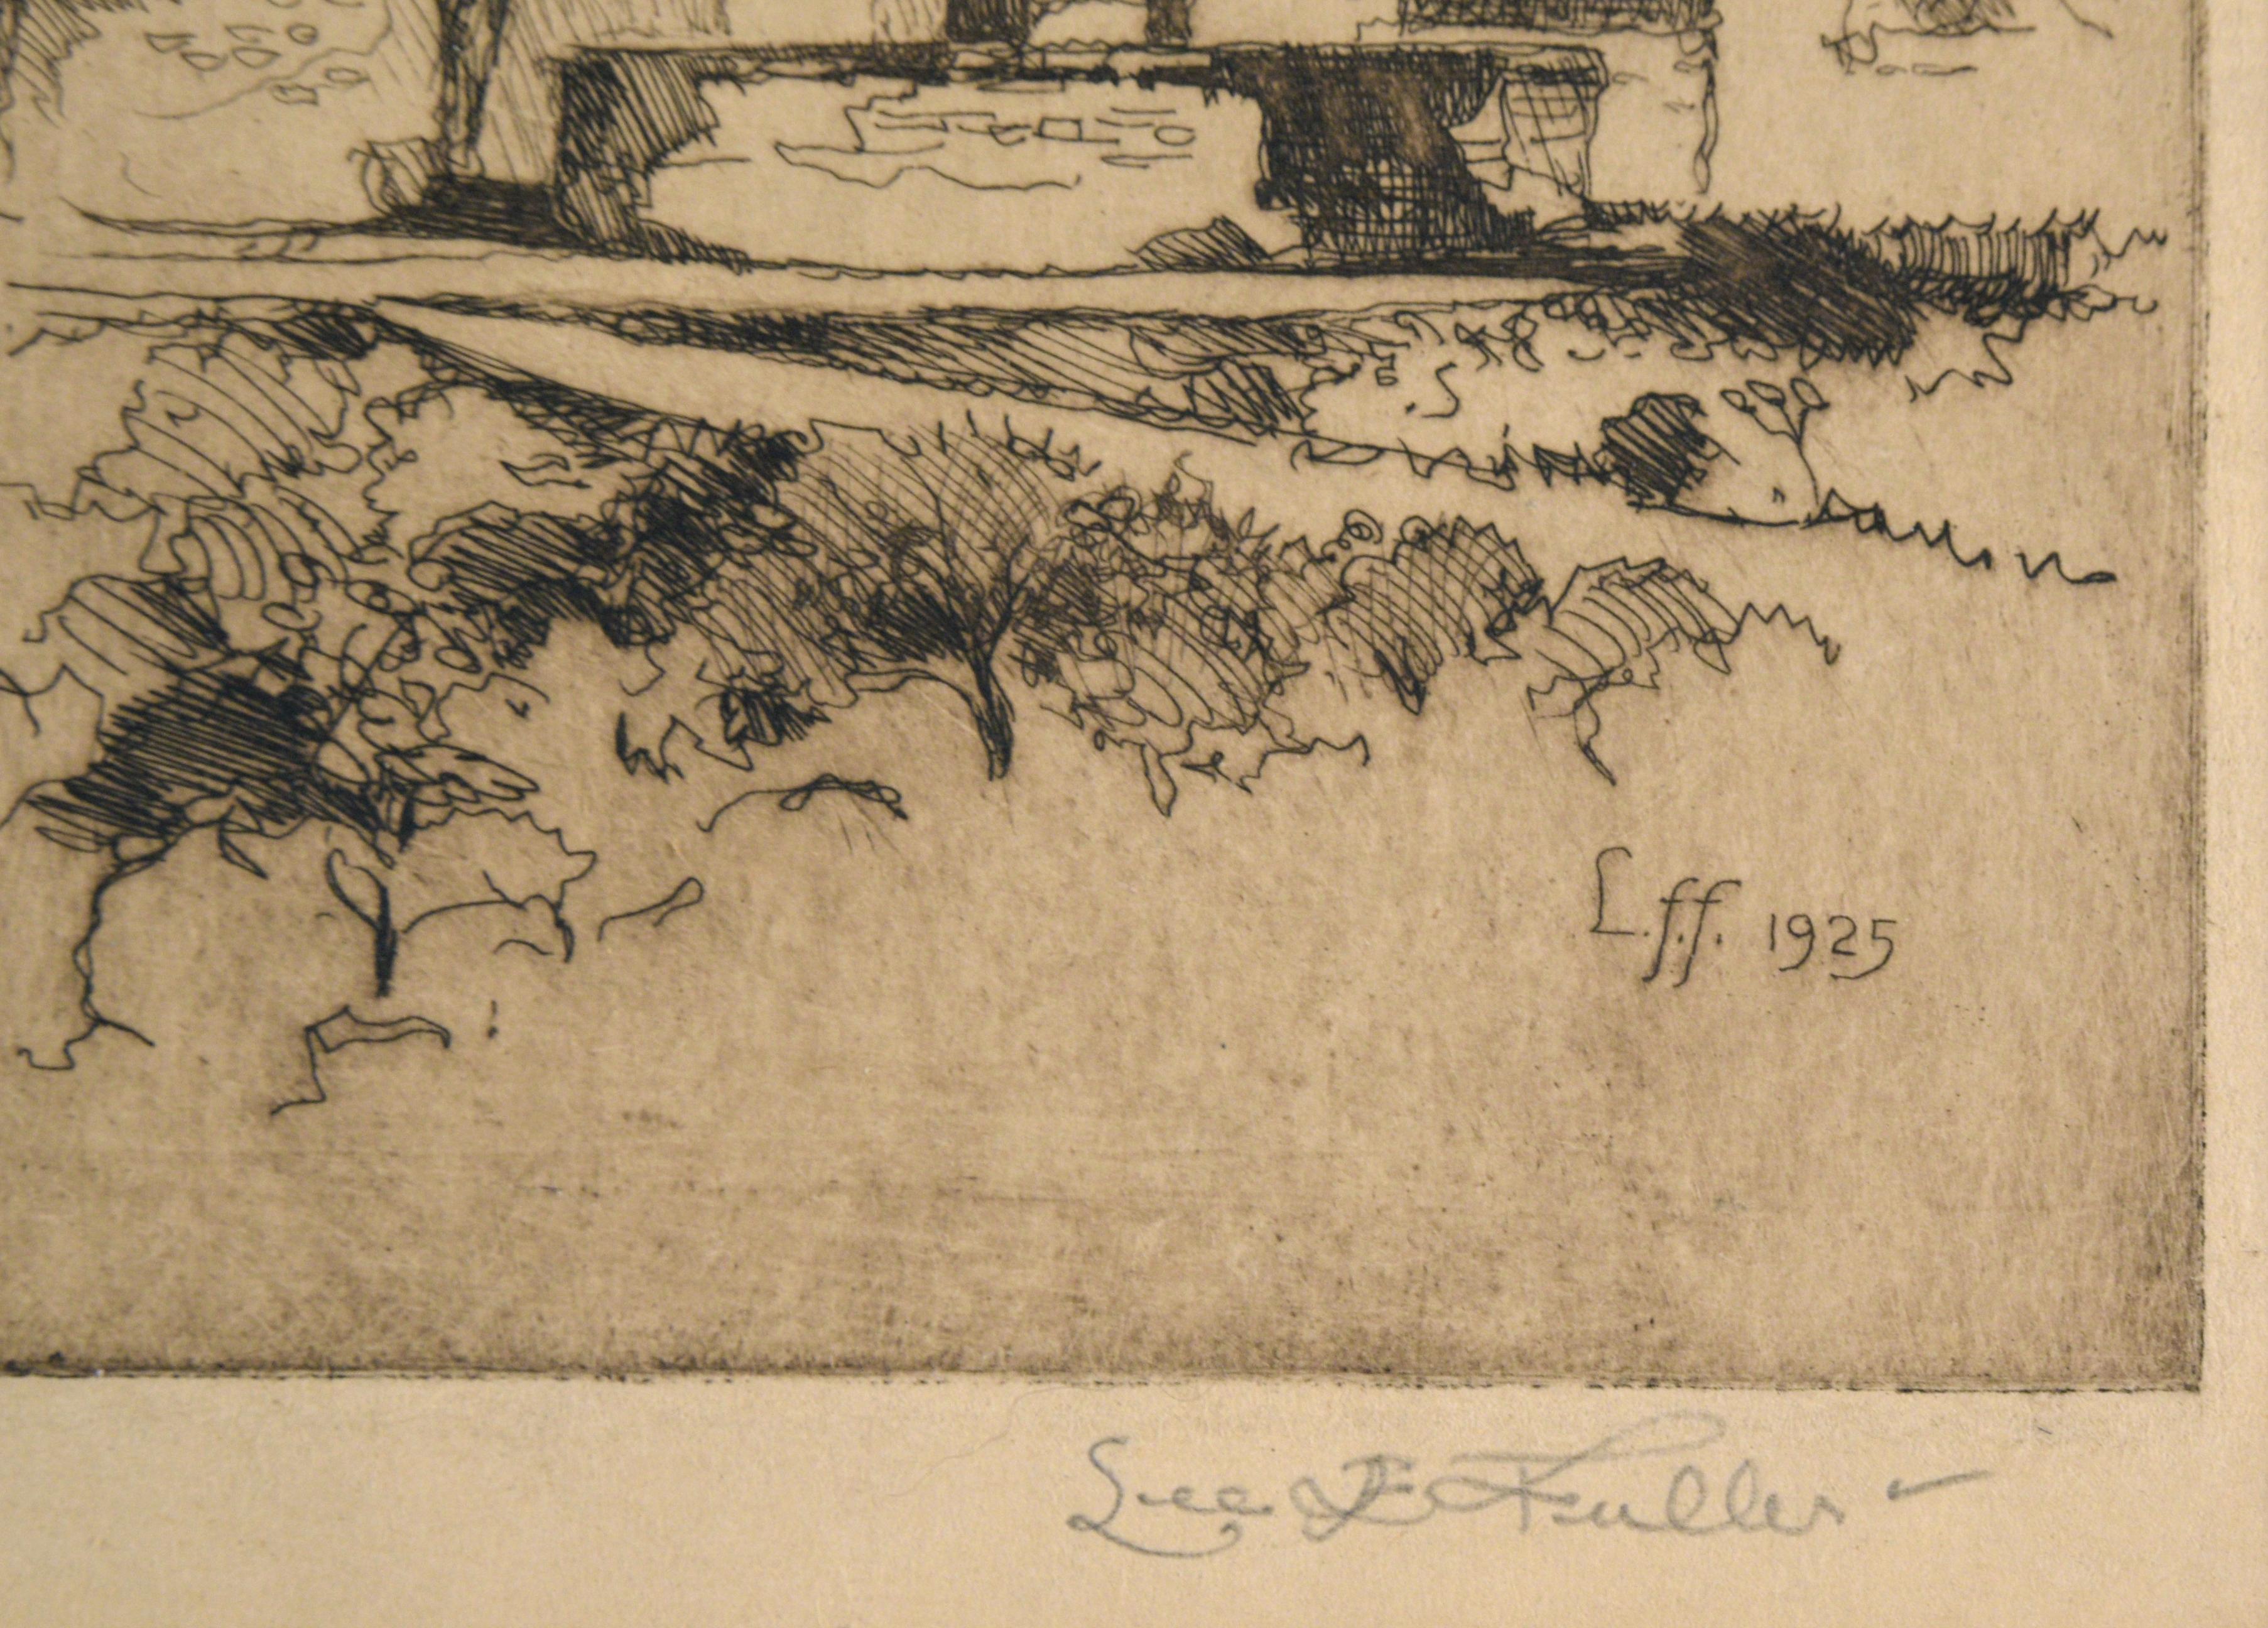 Palm Springs Courtyard with Fountain - Drypoint Etching on Paper - American Impressionist Print by Leland Fuller